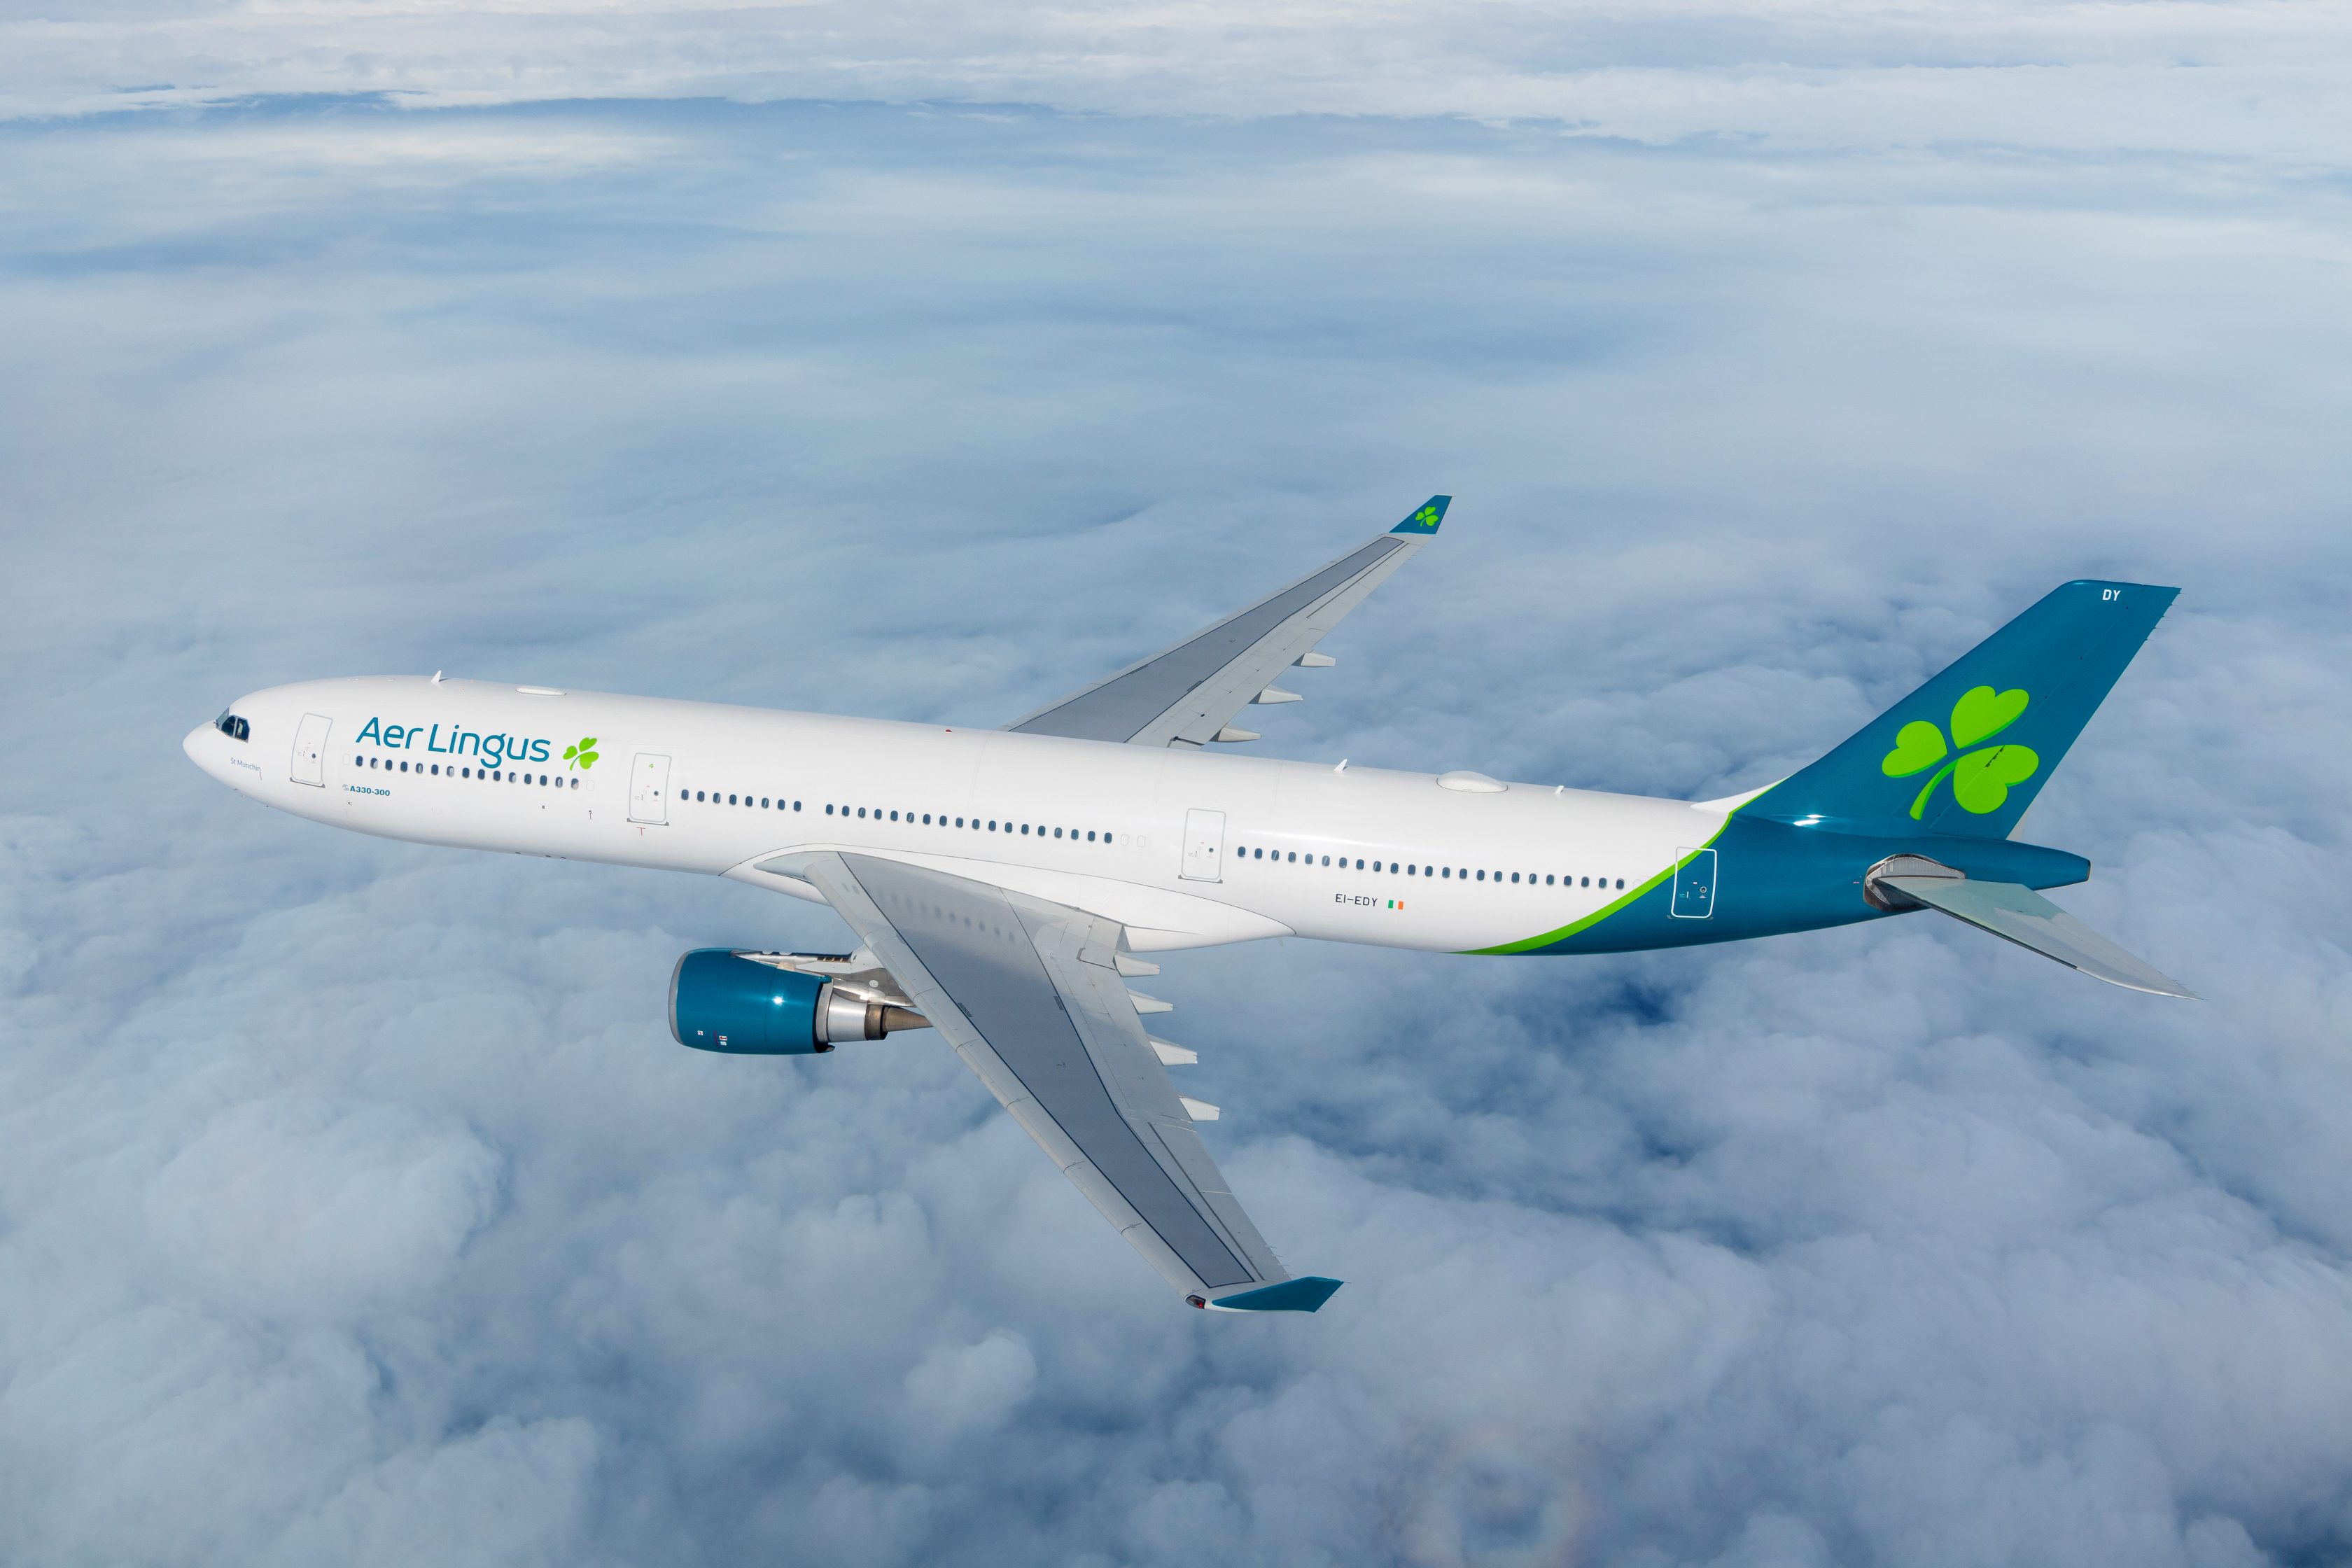 Aer Lingus and Allianz Partners extend long-term partnership across Europe and USA